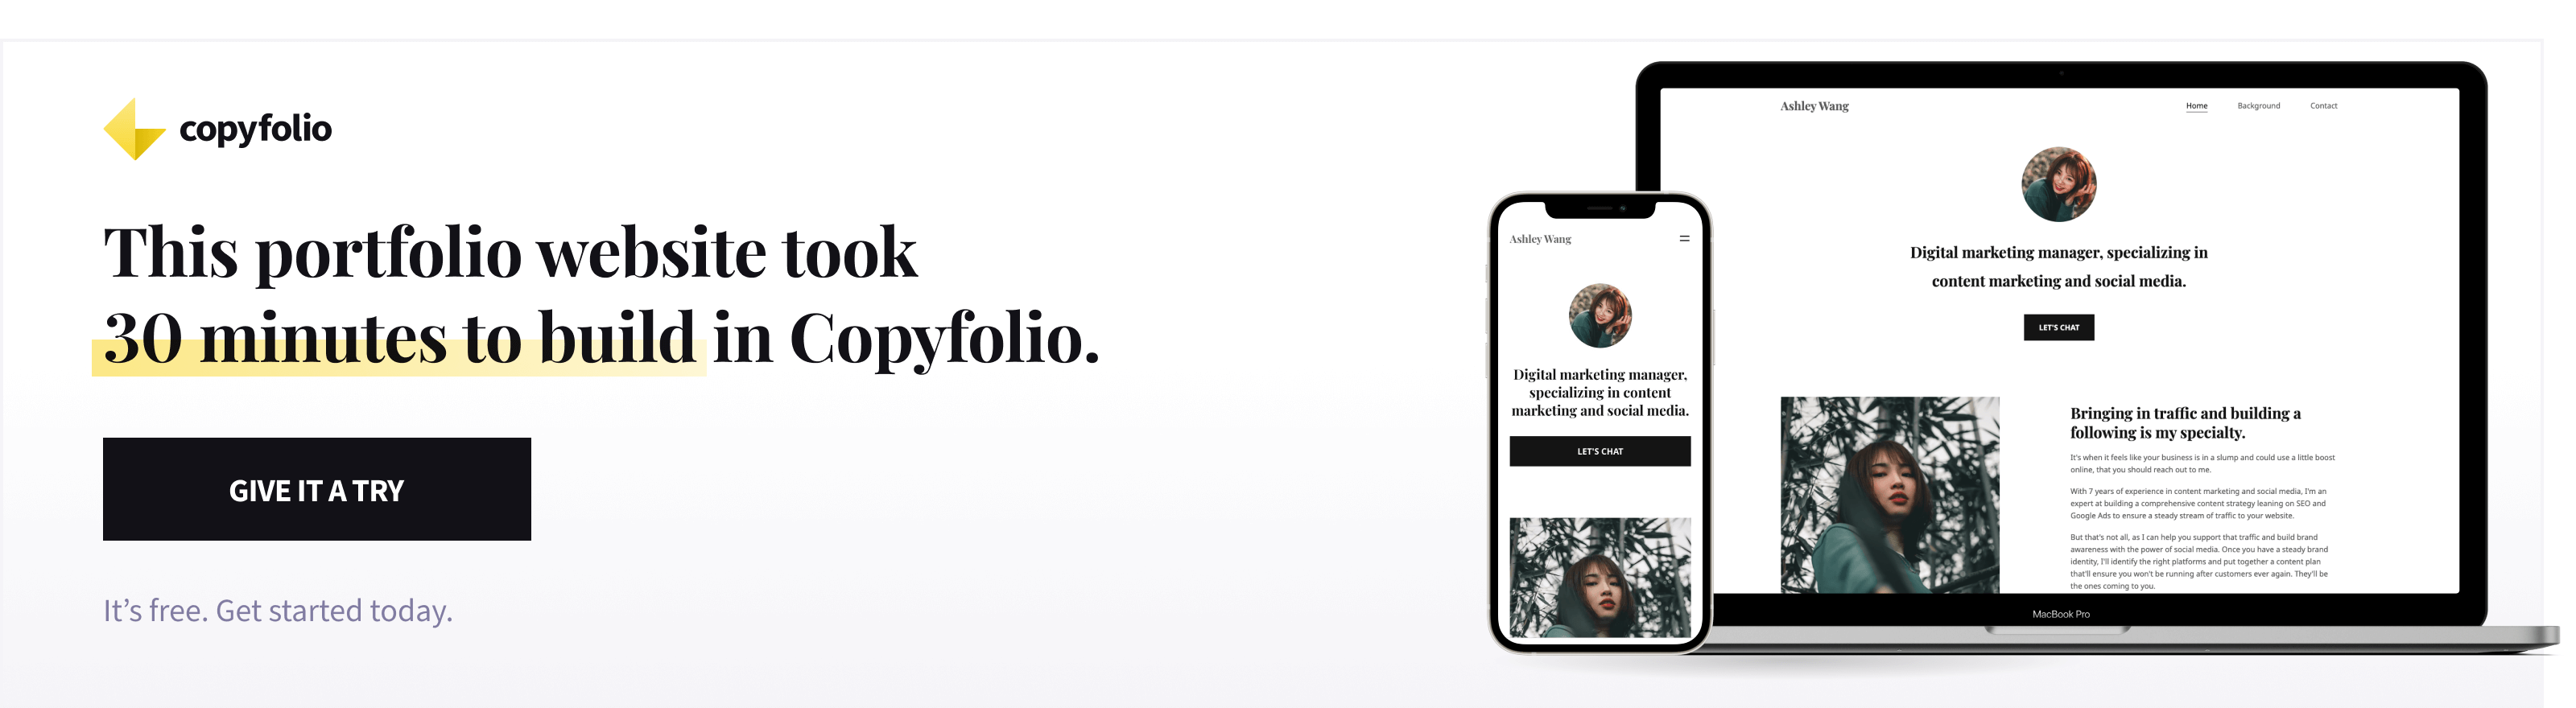 This copywriting portfolio website took 30 minutes to build with a template in Copyfolio. Give it a try.